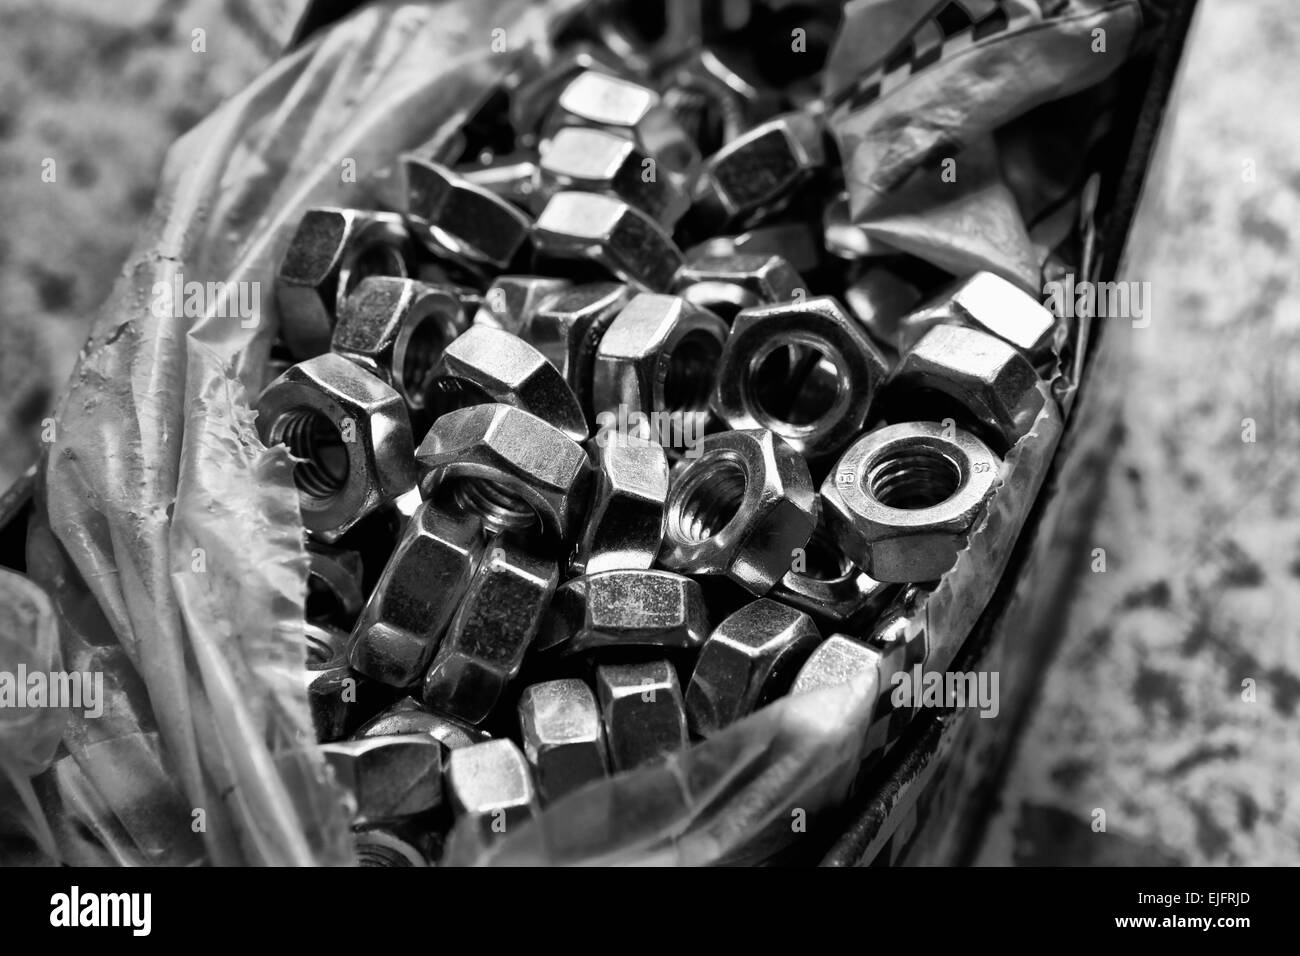 Plastic bag of load of new alloy nuts over a mechanic table Stock Photo